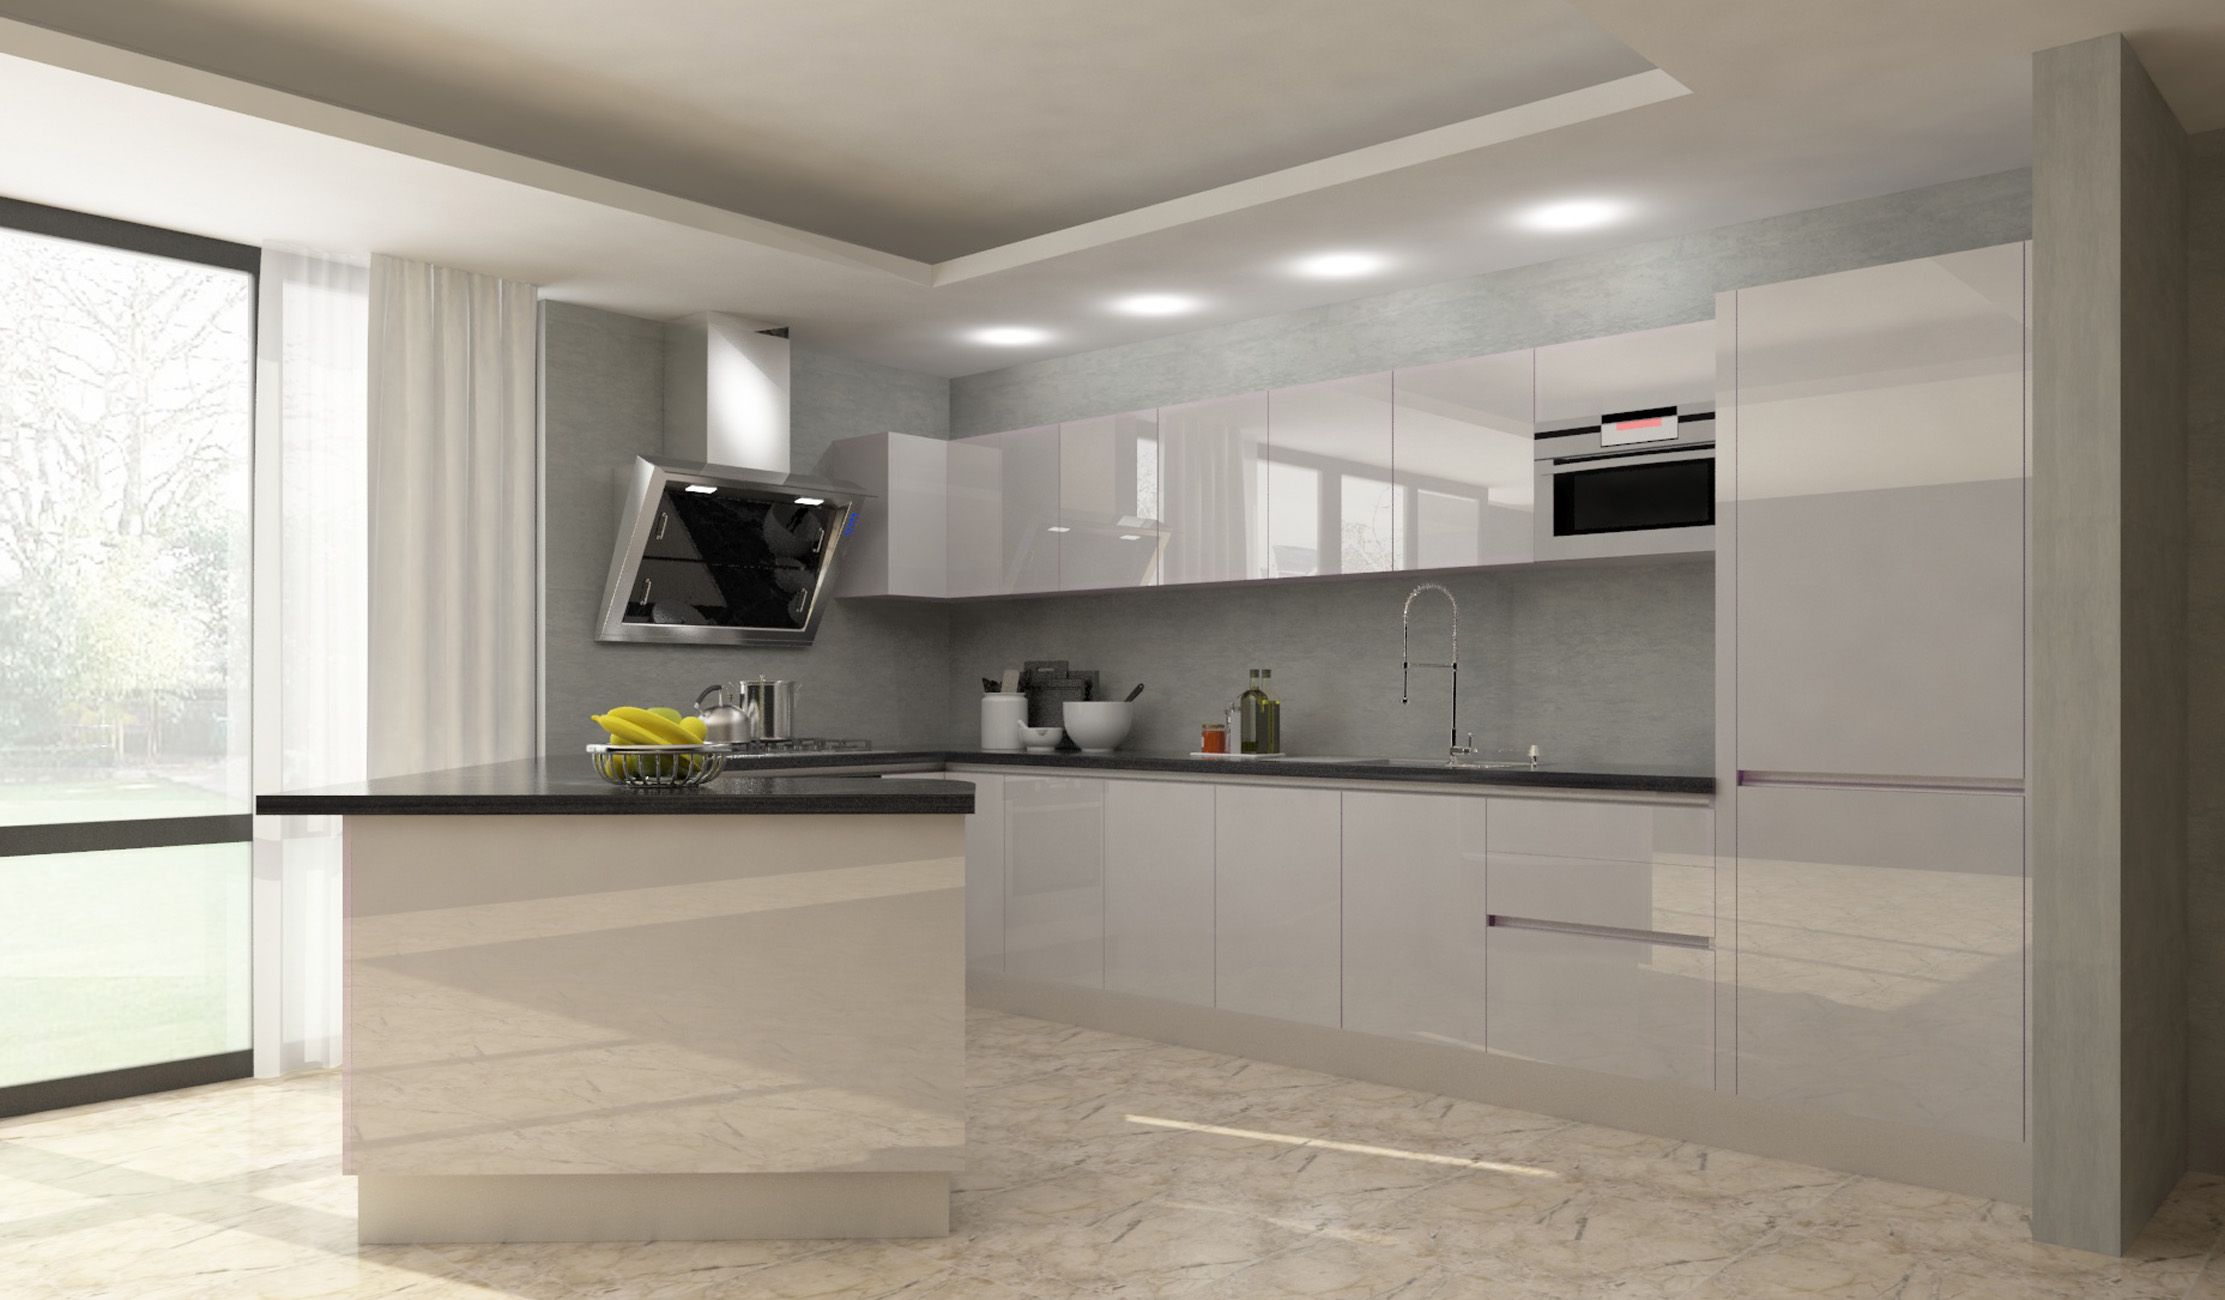 The Kingdom of Bahrain project white lacquered kitchen cabinet.jpg